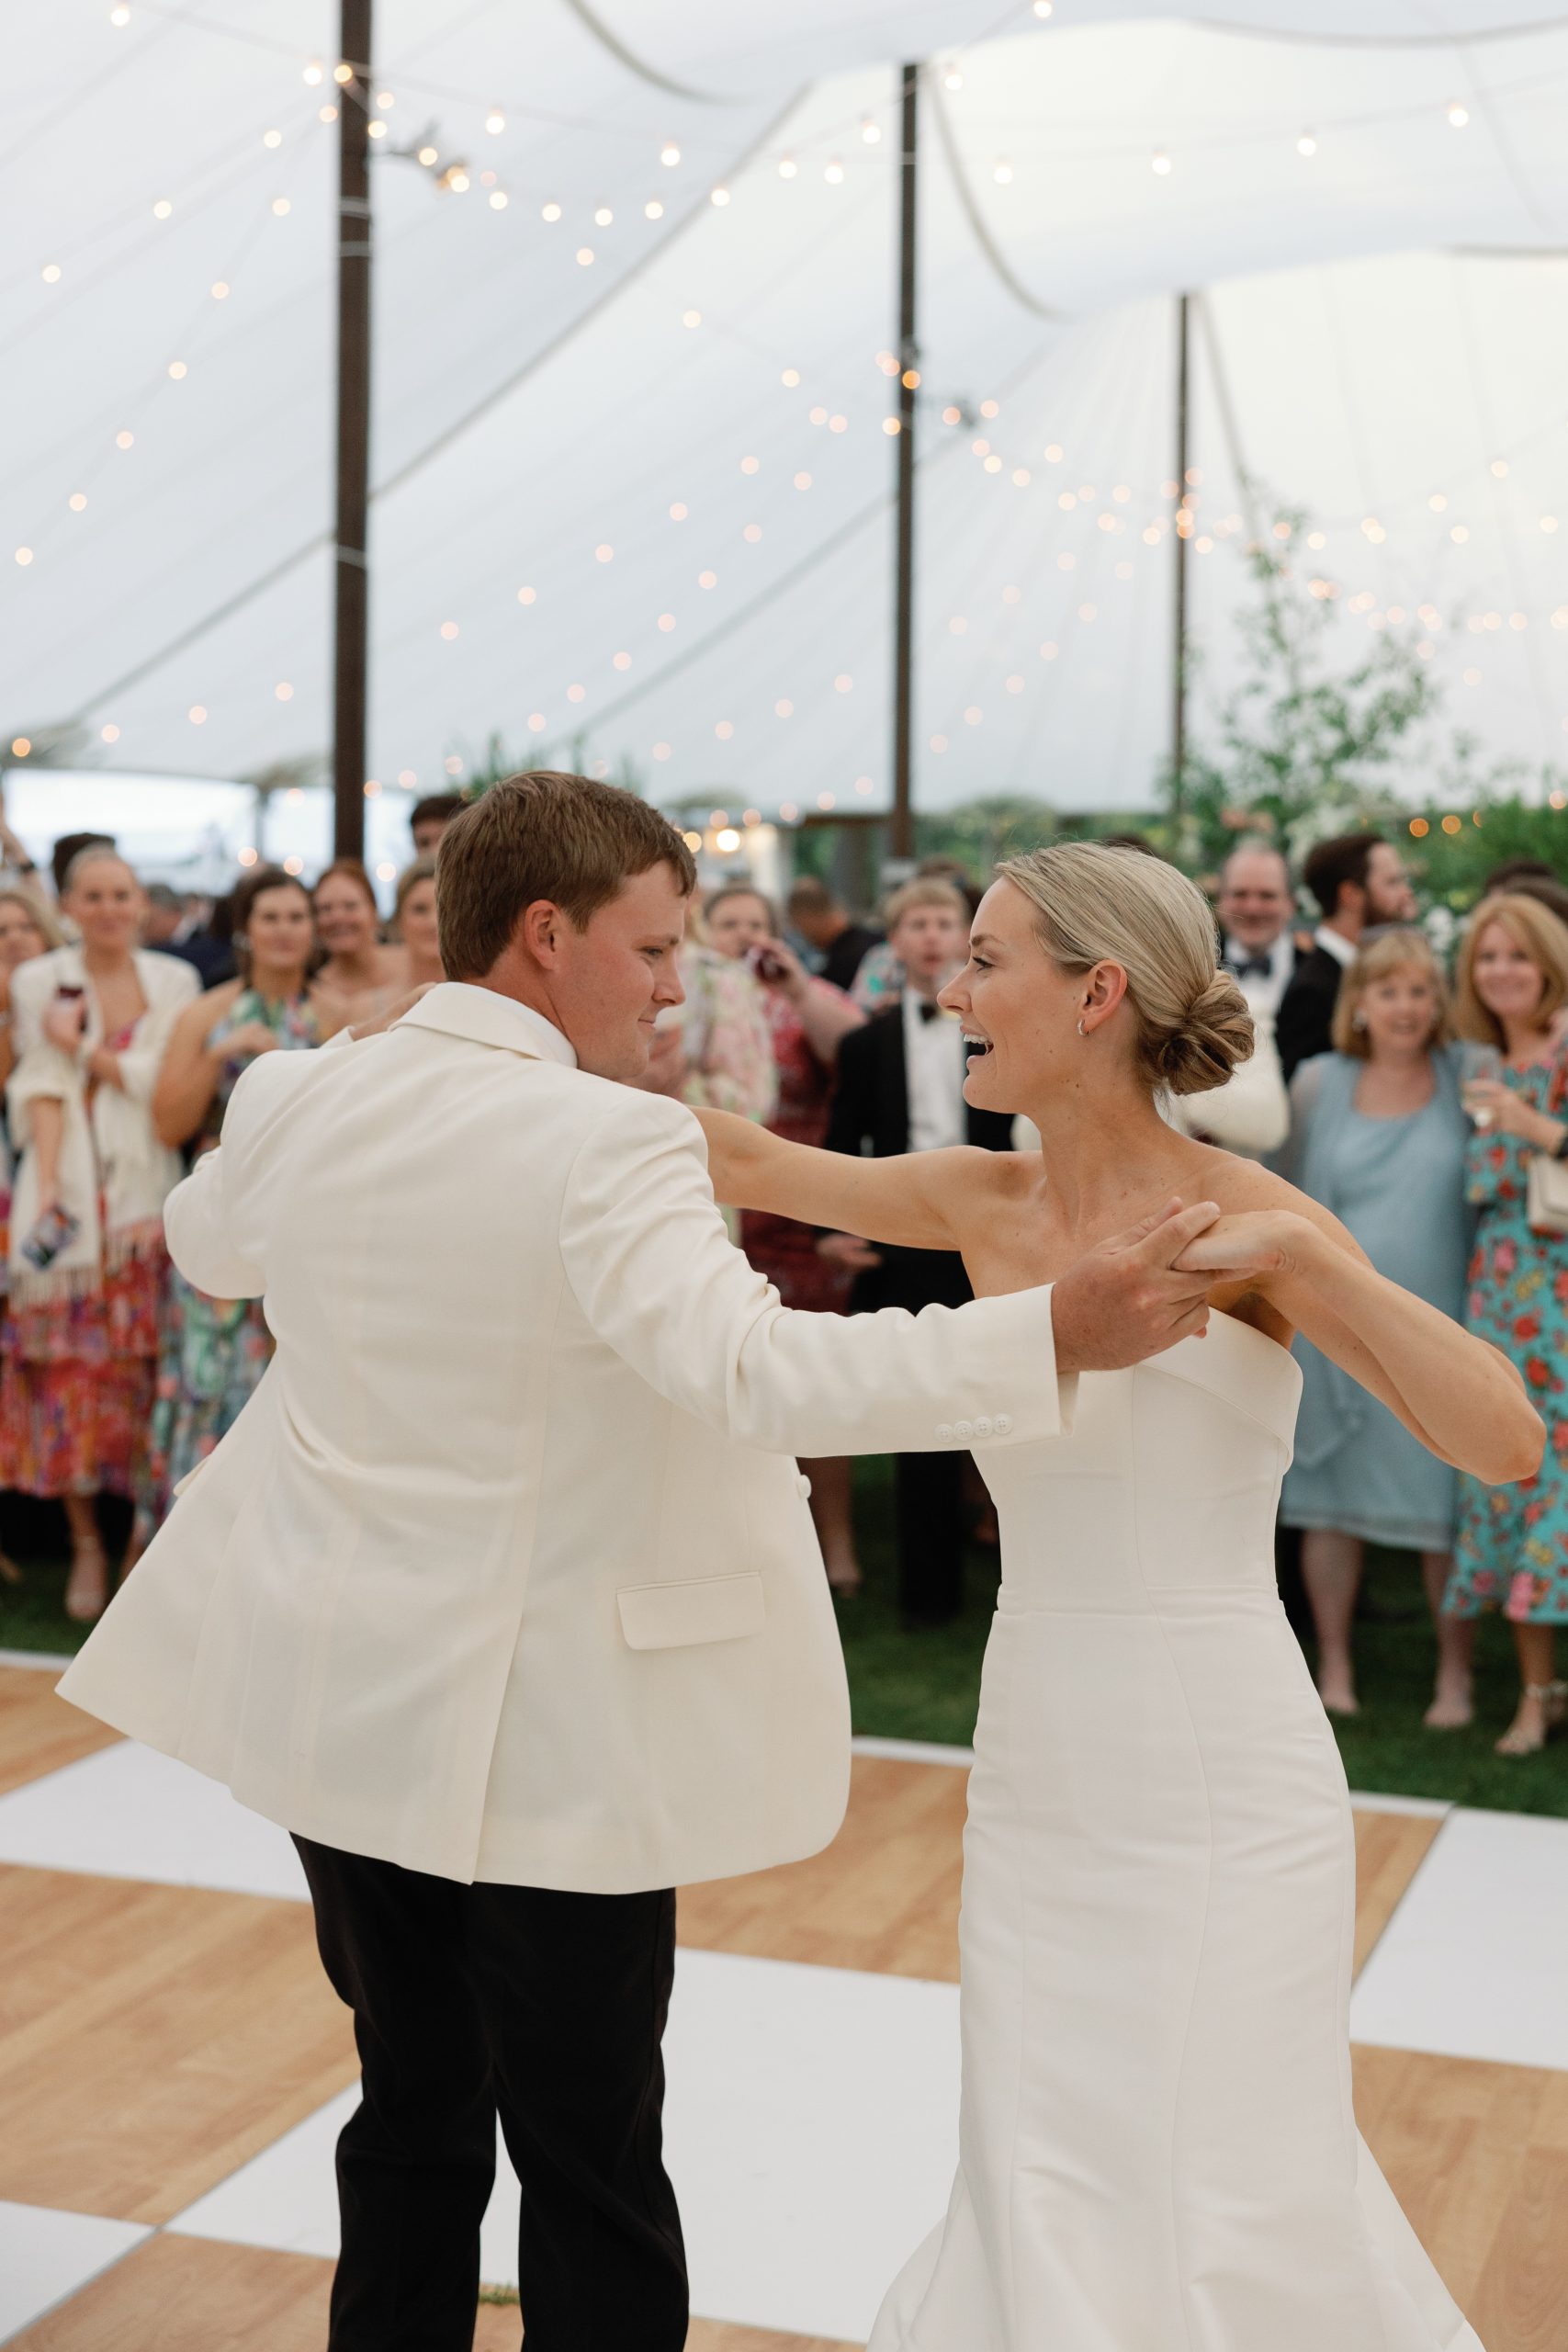 Catered by Southern Way Catering, the reception had a large perfectly sodded tent that included a white and wood patterned dance floor and raised stage for the band. Blake and Bennett’s first dance was to Signed, Sealed, Delivered (I’m Yours) by Stevie Wonder. 